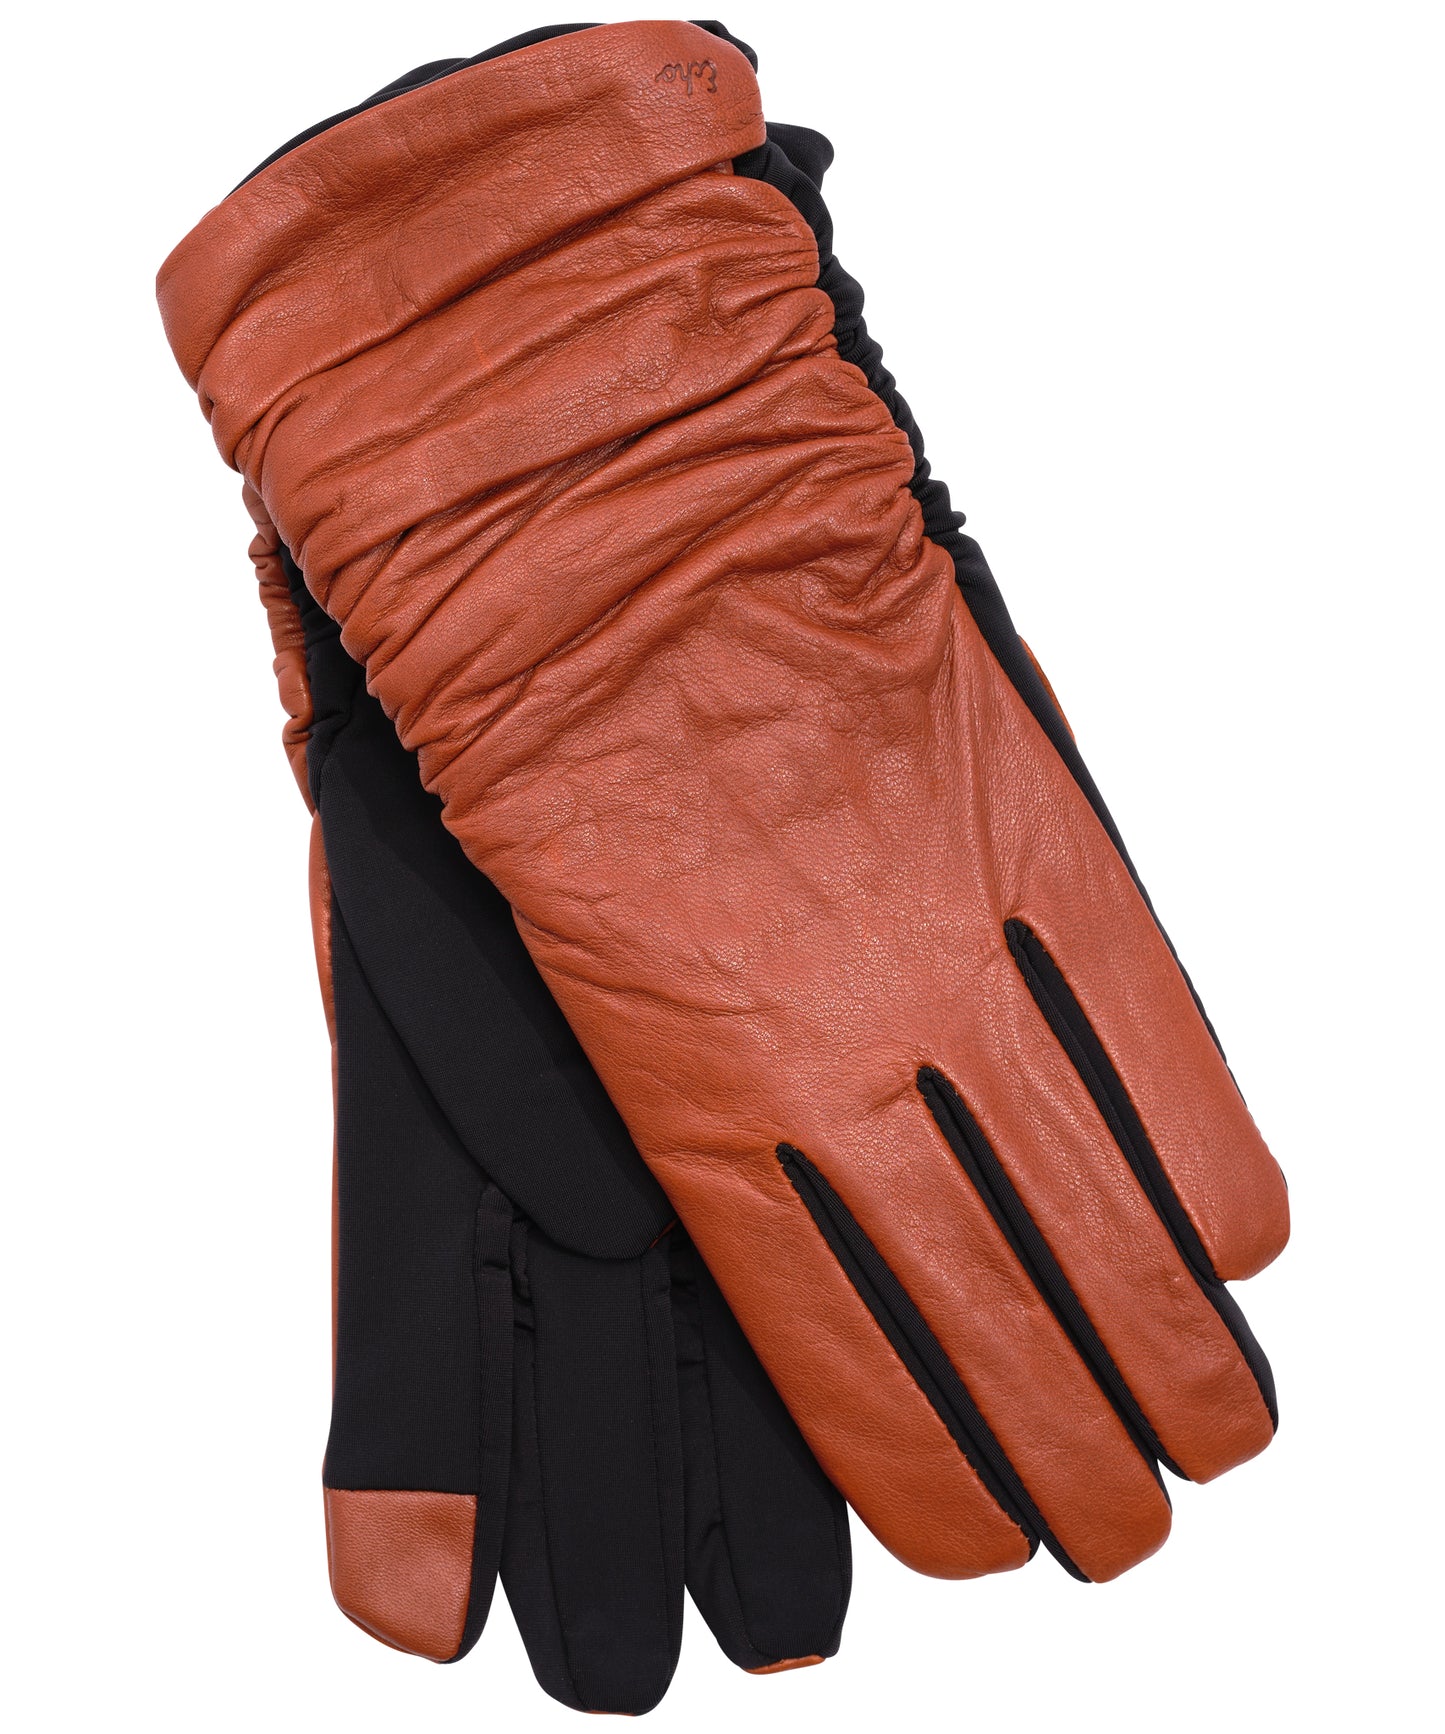 Ruched Leather Glove in color Chestnut